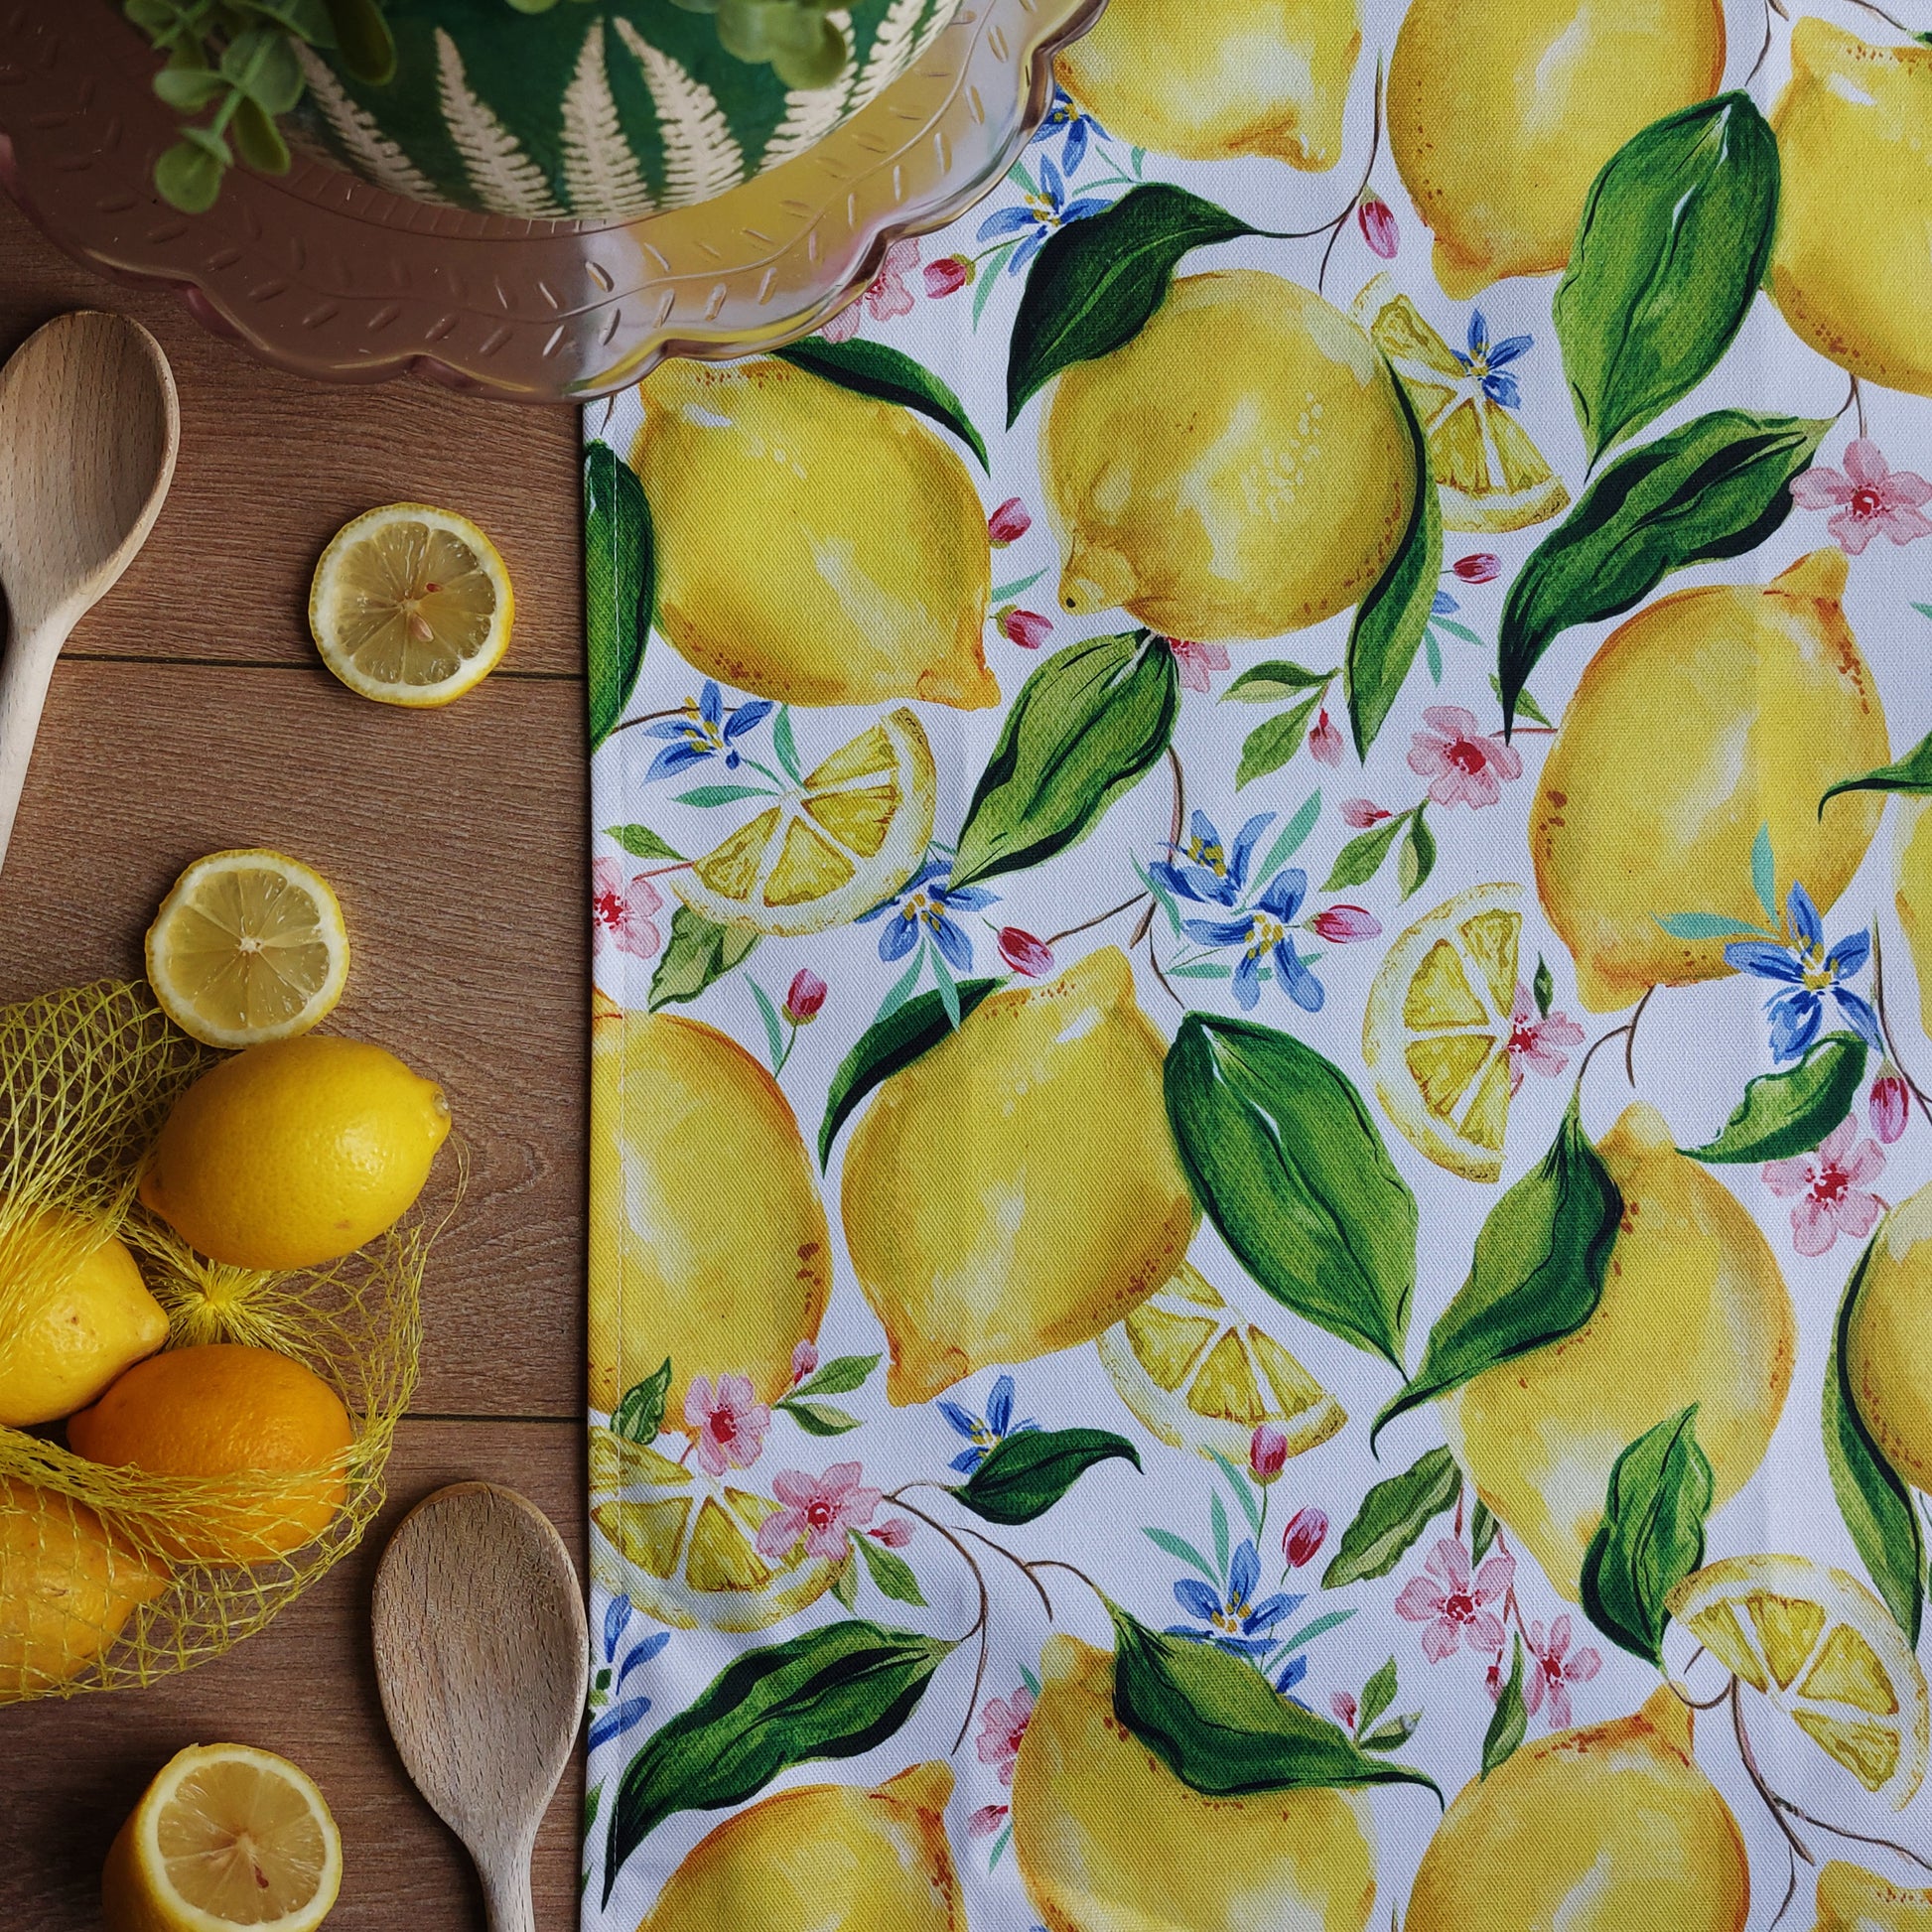 lemon pattern tea towel perfect for gifting to the person you know who loves baking, cooking and decorating their kitchen